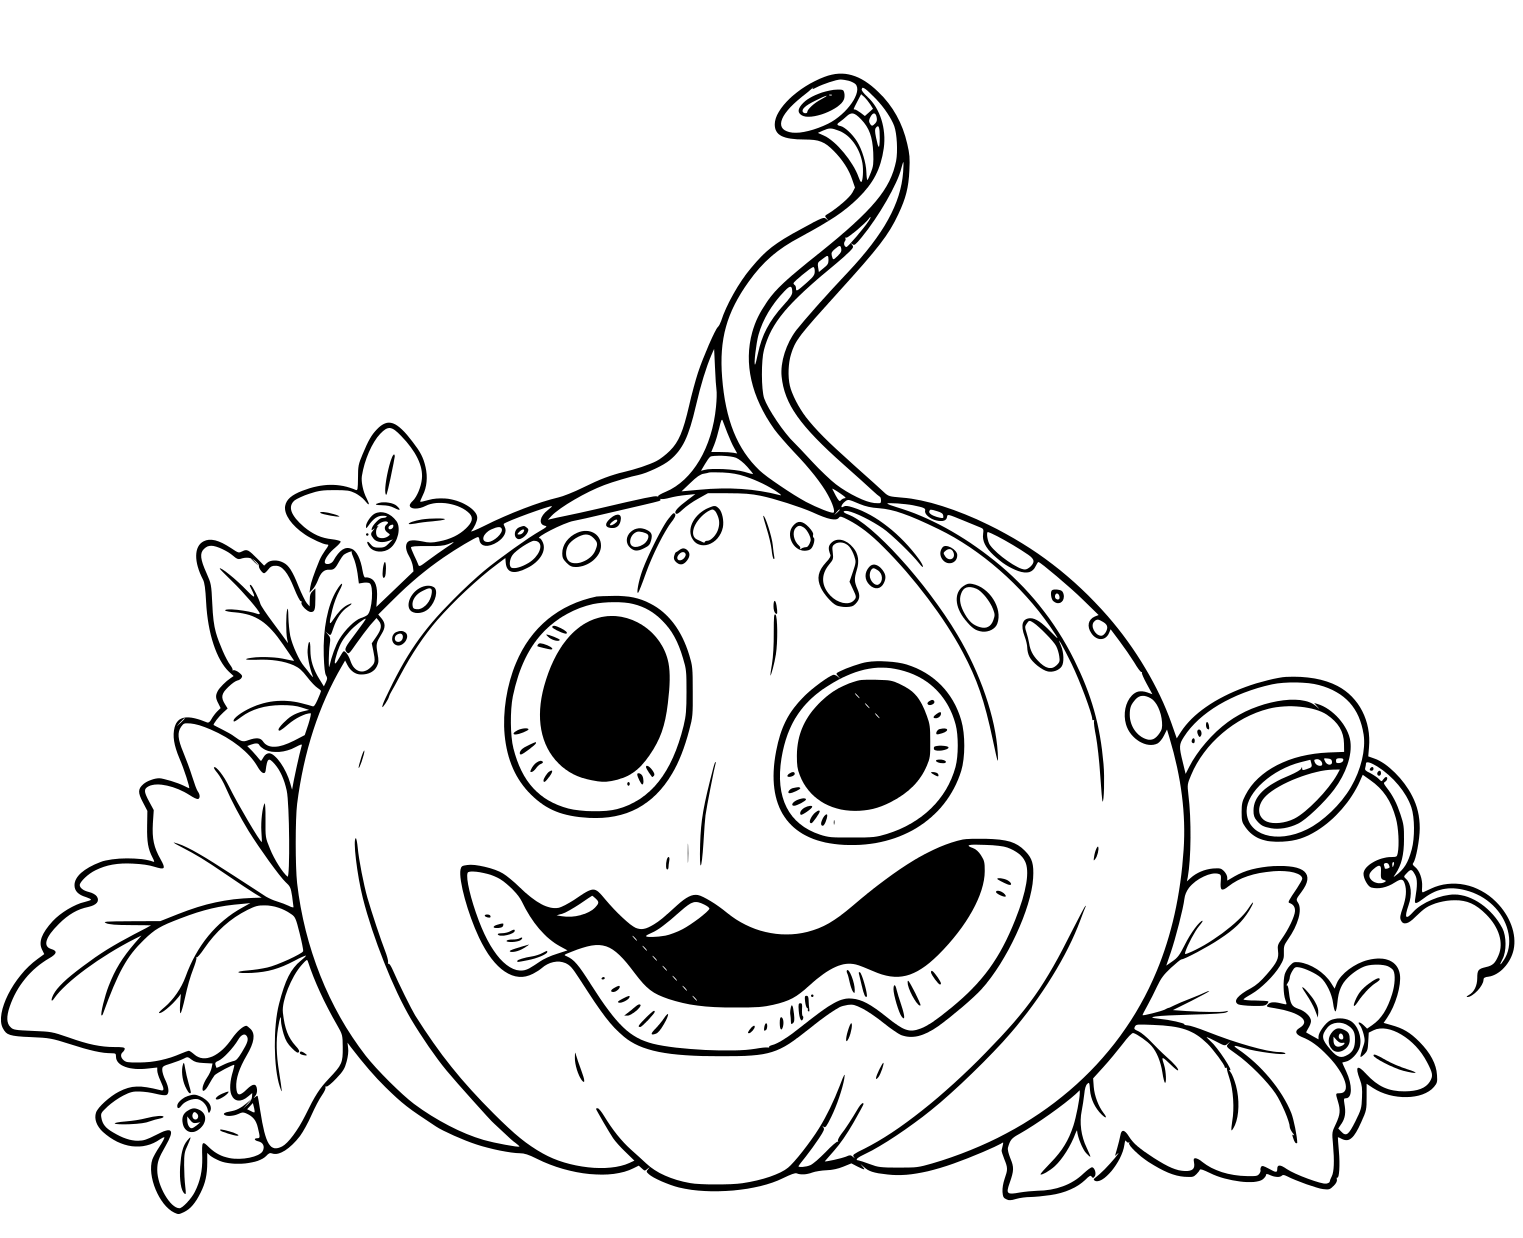 Funny Lantern From Pumpkin With The Cut Out Of A Grin And Leaves Coloring Page